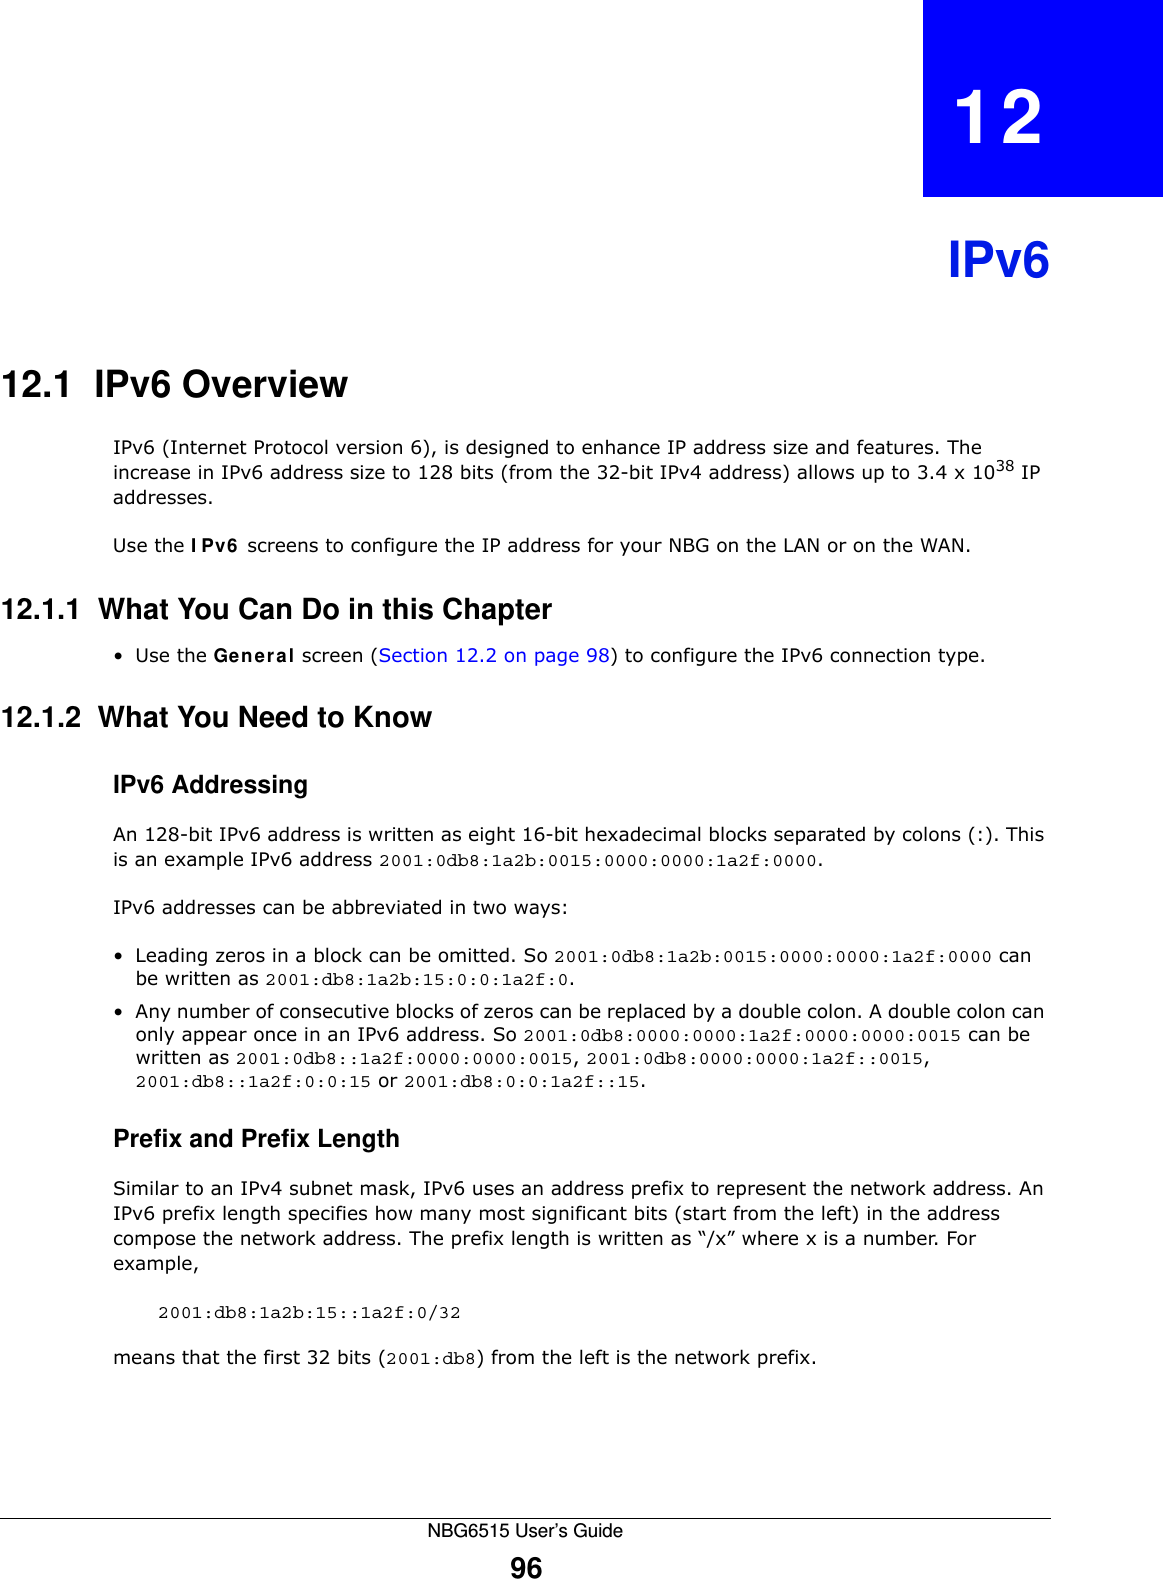 NBG6515 User’s Guide96CHAPTER   12IPv612.1  IPv6 OverviewIPv6 (Internet Protocol version 6), is designed to enhance IP address size and features. The increase in IPv6 address size to 128 bits (from the 32-bit IPv4 address) allows up to 3.4 x 1038 IP addresses. Use the IPv6 screens to configure the IP address for your NBG on the LAN or on the WAN.12.1.1  What You Can Do in this Chapter•Use the General screen (Section 12.2 on page 98) to configure the IPv6 connection type.12.1.2  What You Need to Know IPv6 AddressingAn 128-bit IPv6 address is written as eight 16-bit hexadecimal blocks separated by colons (:). This is an example IPv6 address 2001:0db8:1a2b:0015:0000:0000:1a2f:0000. IPv6 addresses can be abbreviated in two ways:• Leading zeros in a block can be omitted. So 2001:0db8:1a2b:0015:0000:0000:1a2f:0000 can be written as 2001:db8:1a2b:15:0:0:1a2f:0. • Any number of consecutive blocks of zeros can be replaced by a double colon. A double colon can only appear once in an IPv6 address. So 2001:0db8:0000:0000:1a2f:0000:0000:0015 can be written as 2001:0db8::1a2f:0000:0000:0015, 2001:0db8:0000:0000:1a2f::0015, 2001:db8::1a2f:0:0:15 or 2001:db8:0:0:1a2f::15.Prefix and Prefix LengthSimilar to an IPv4 subnet mask, IPv6 uses an address prefix to represent the network address. An IPv6 prefix length specifies how many most significant bits (start from the left) in the address compose the network address. The prefix length is written as “/x” where x is a number. For example, 2001:db8:1a2b:15::1a2f:0/32means that the first 32 bits (2001:db8) from the left is the network prefix.